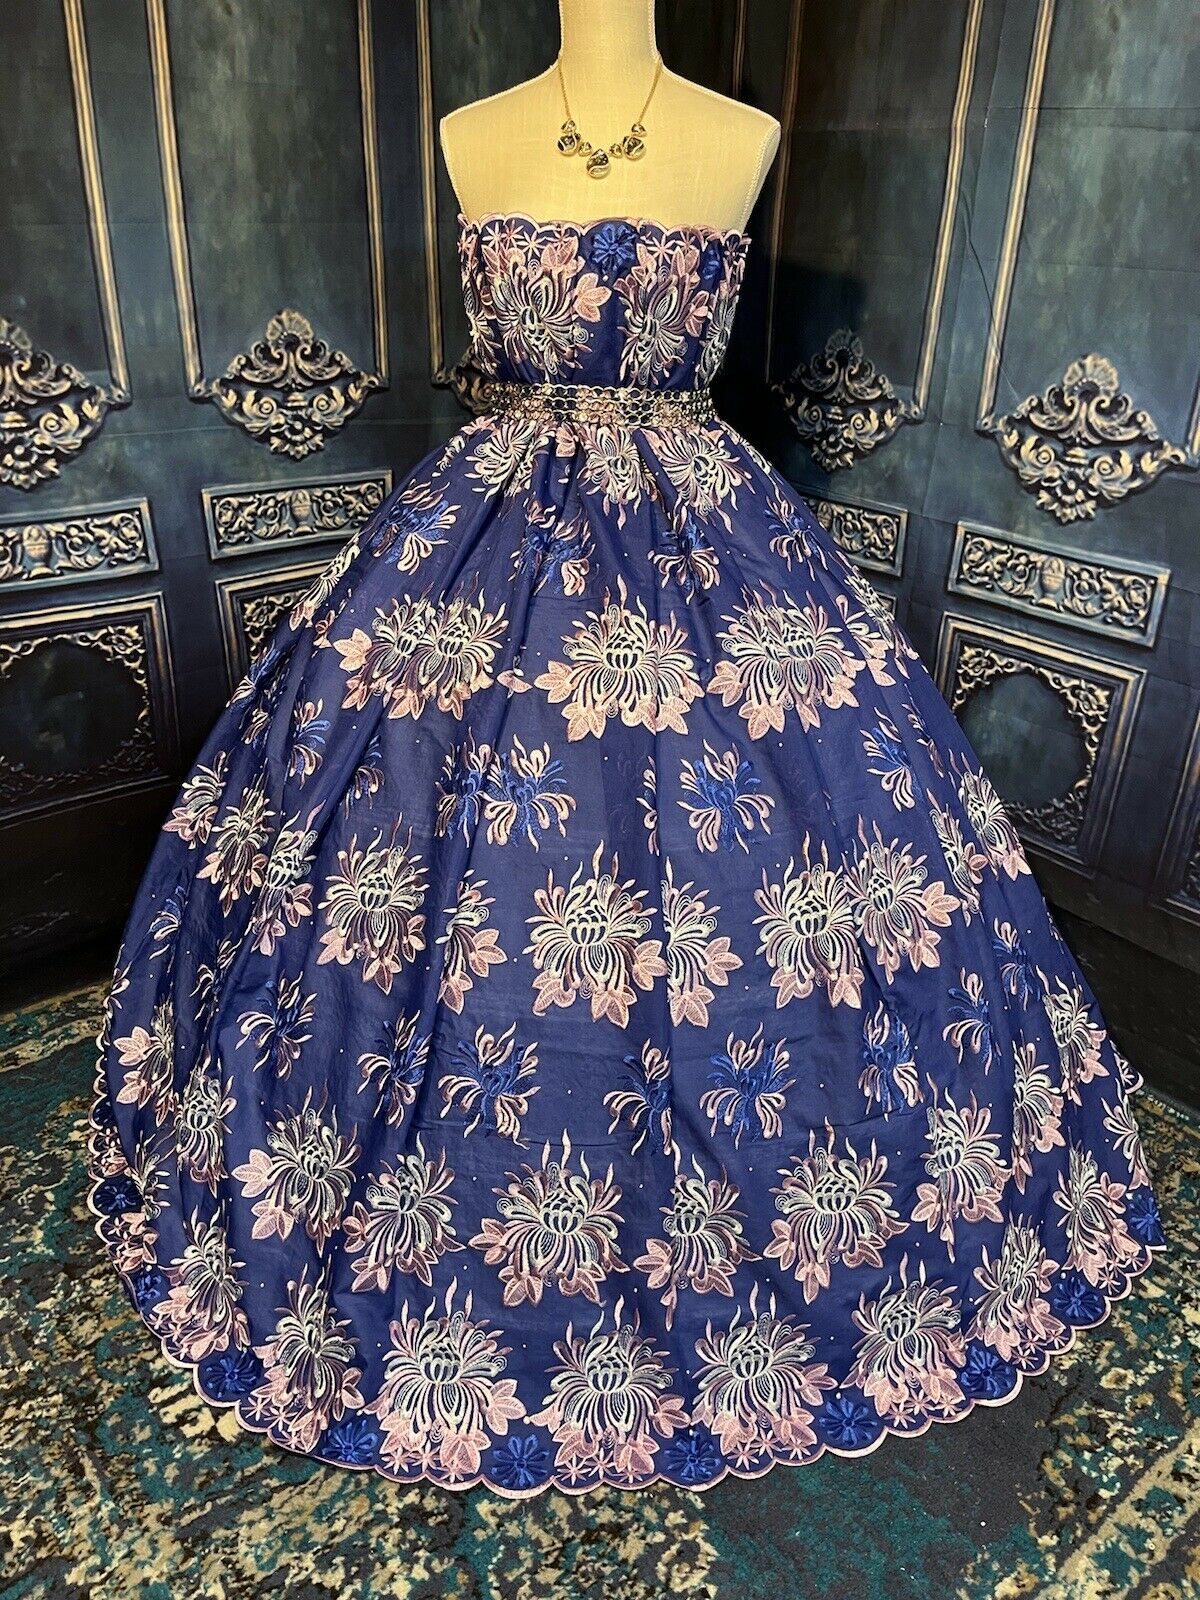 Royal Blue Embroidered Floral Cotton with Rhinestones